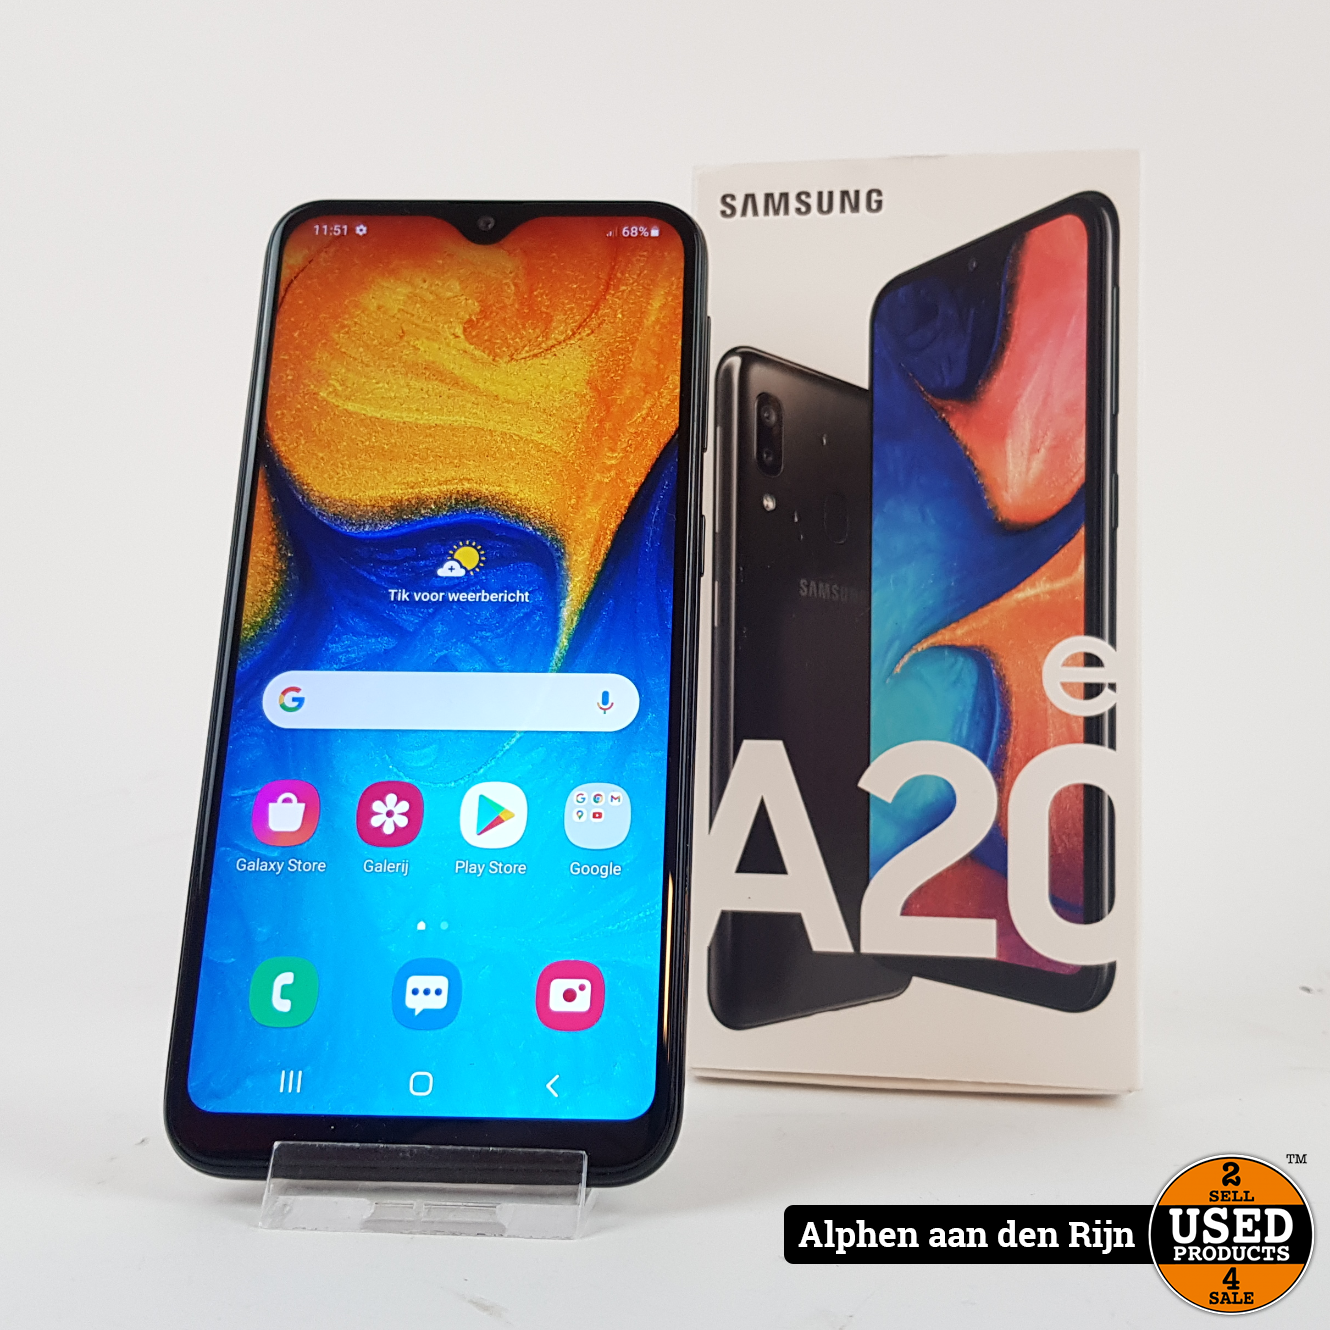 Samsung Galaxy 32GB || Android 11 || Used Products Alphen aan den Rijn